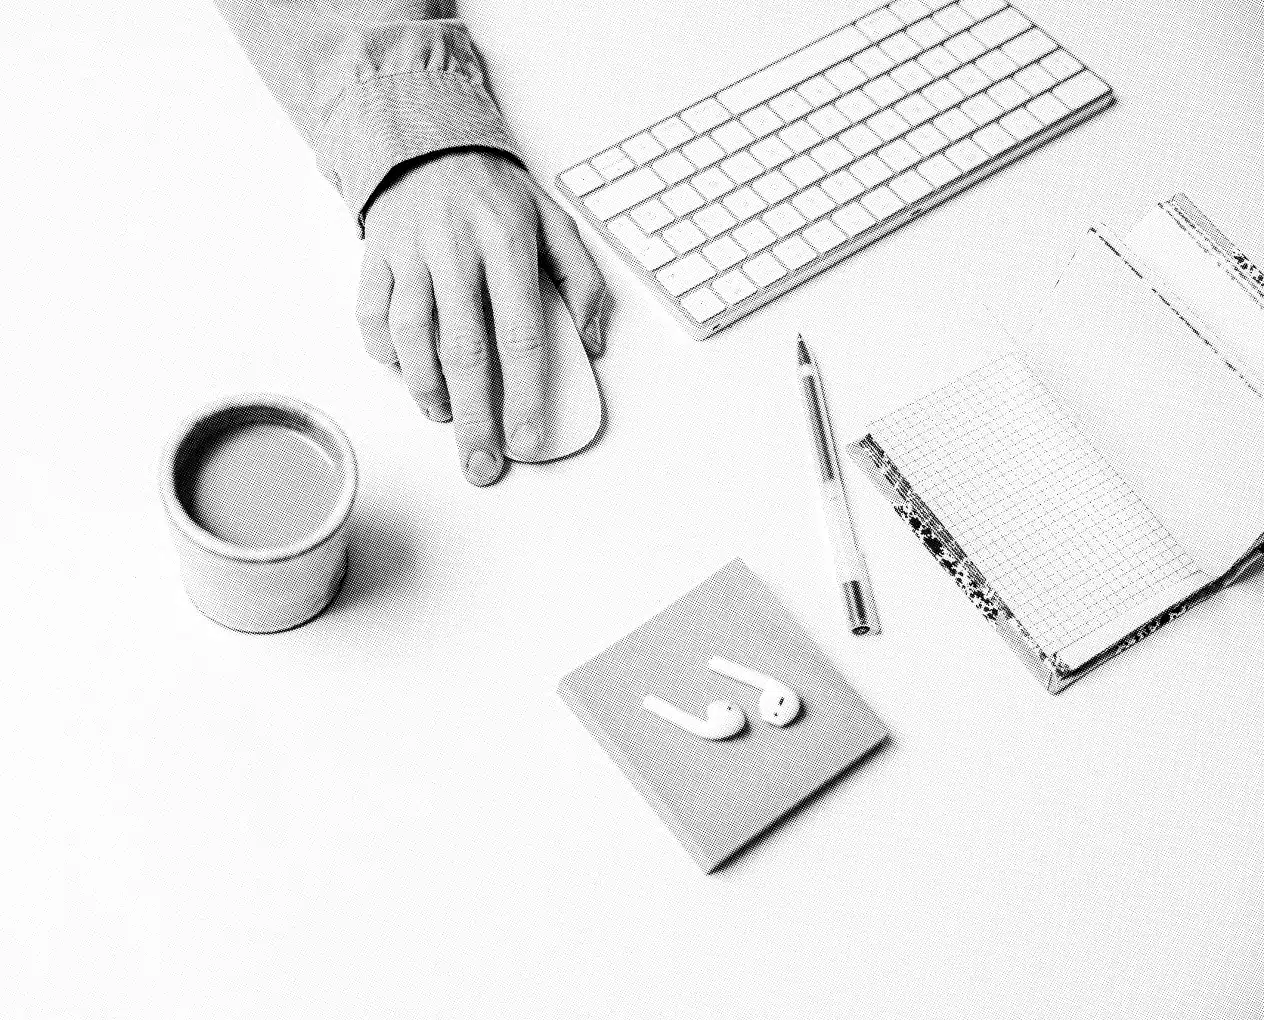 A monochrome image displays a minimalist workspace with a person's hand on a computer mouse, a wireless keyboard, a pen, a notebook, wireless earbuds on a notepad, and a coffee cup. Our approach suggests this clean and organized environment fosters productivity.